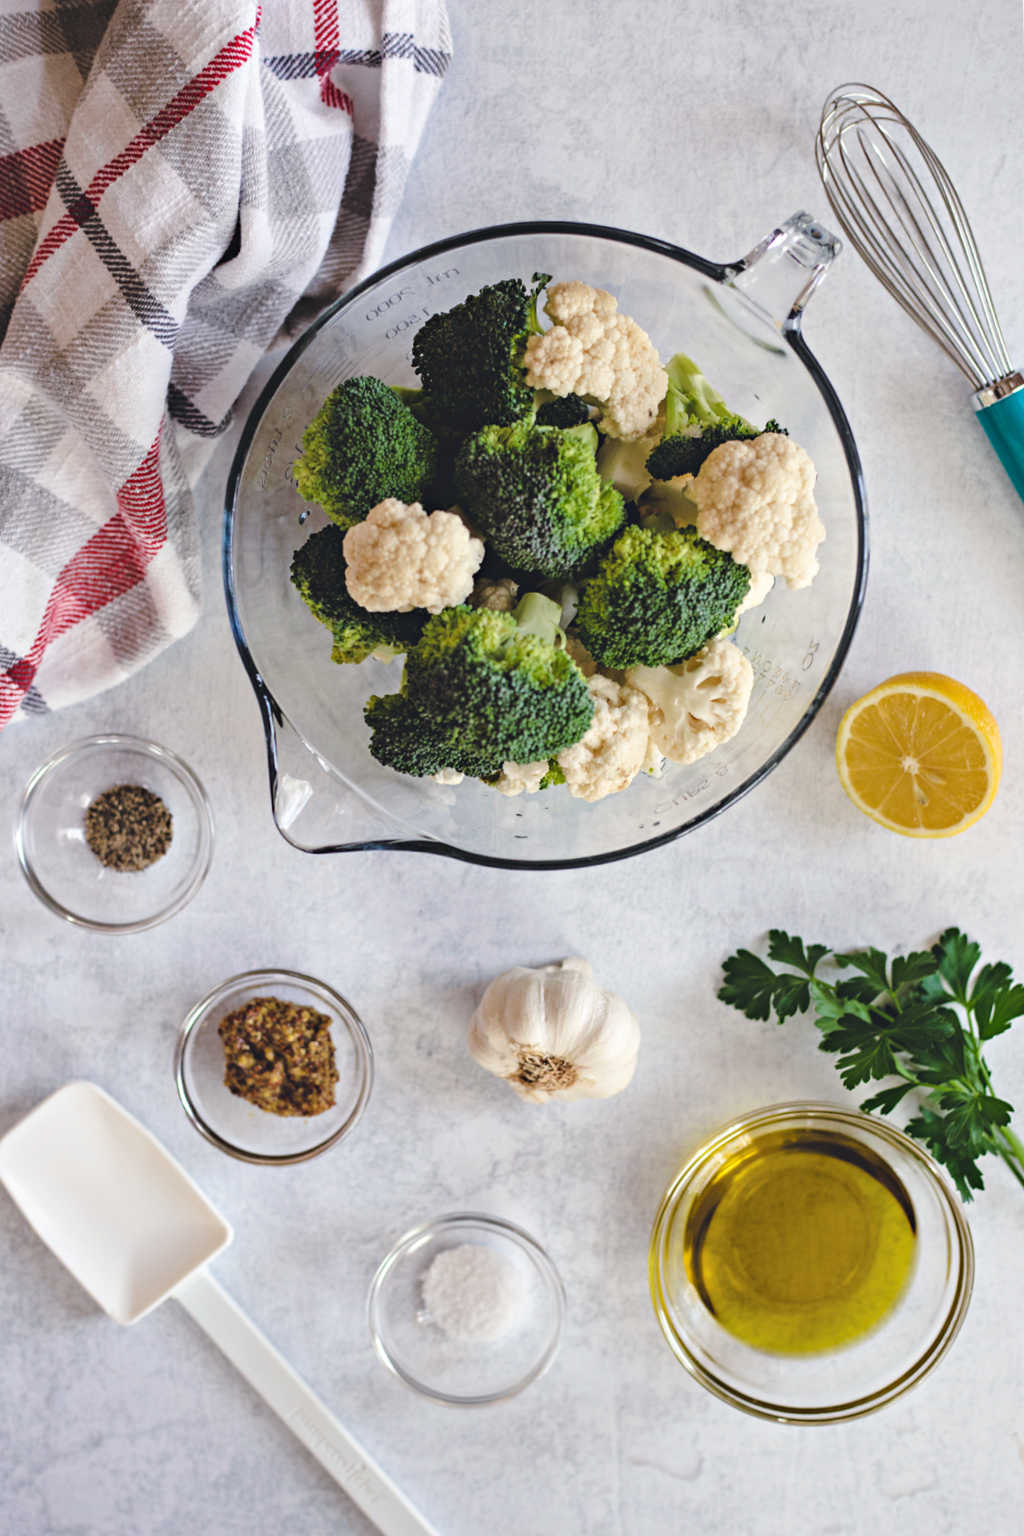 ingredients for roasted broccoli and cauliflower on a table